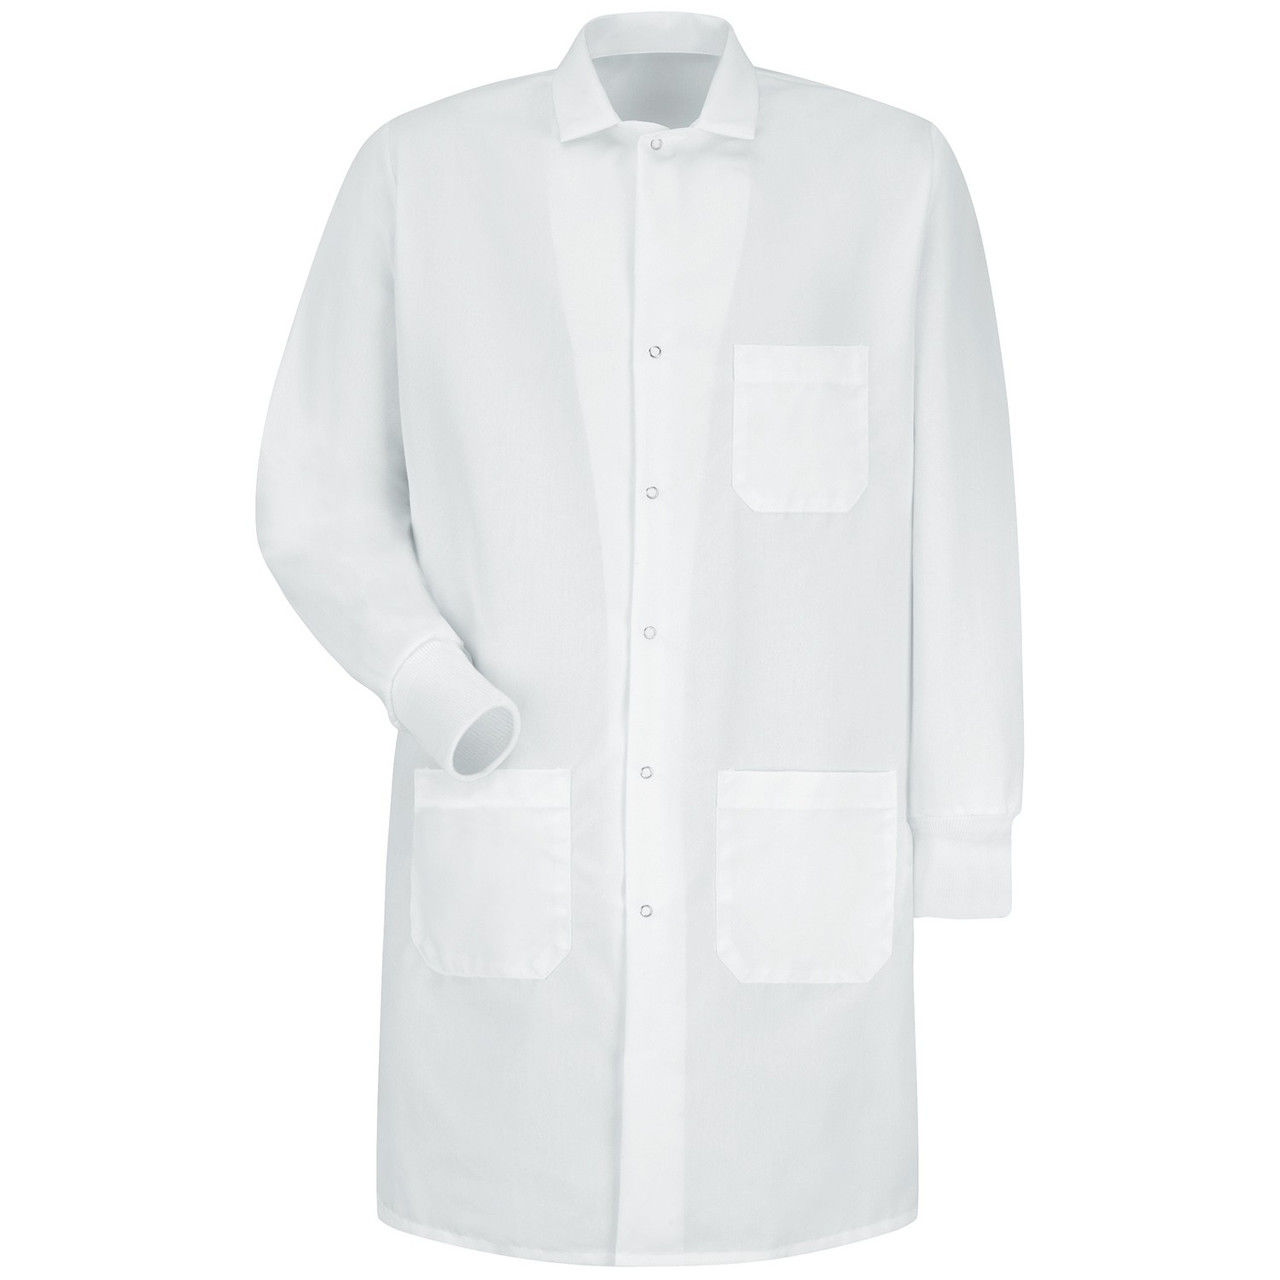 What's the back length of a medium-sized lab coat with cuffed sleeves?